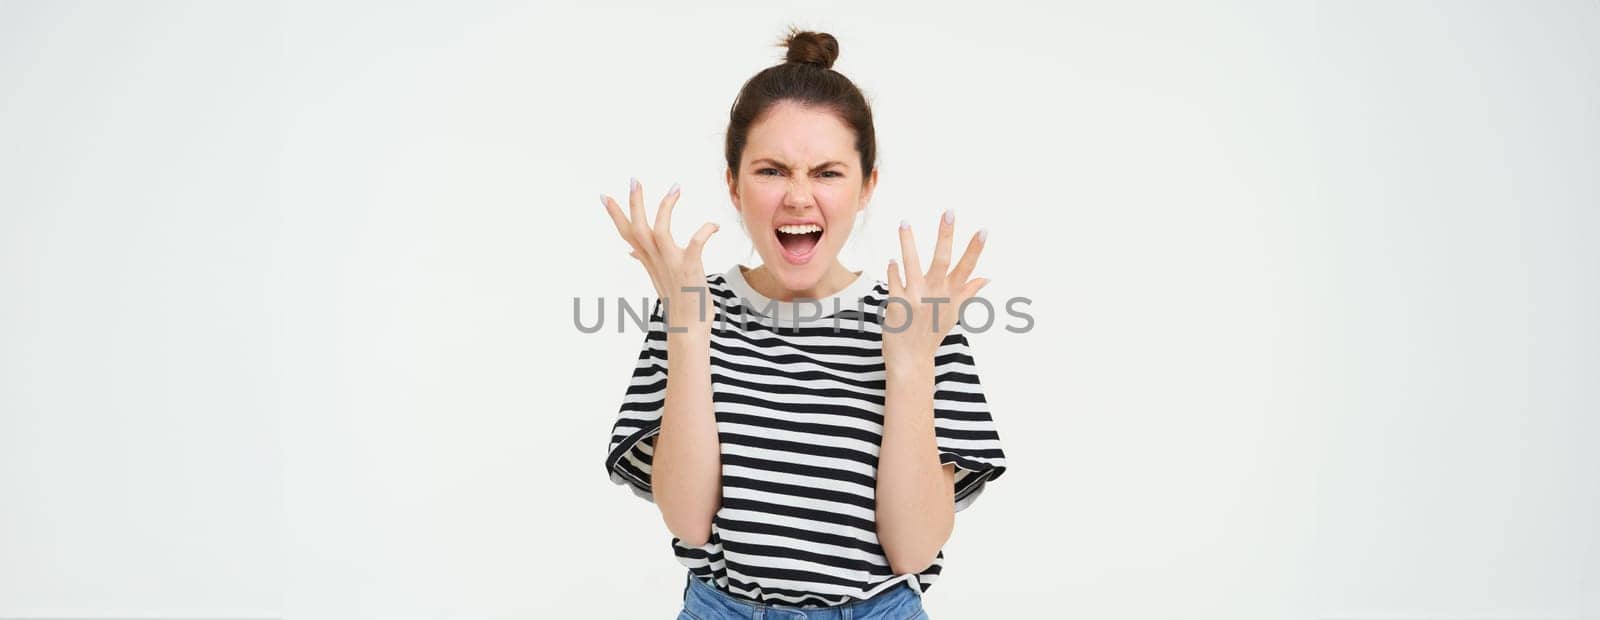 Image of angry woman shouts and shakes hands, stands in casual clothes over white background. Copy space